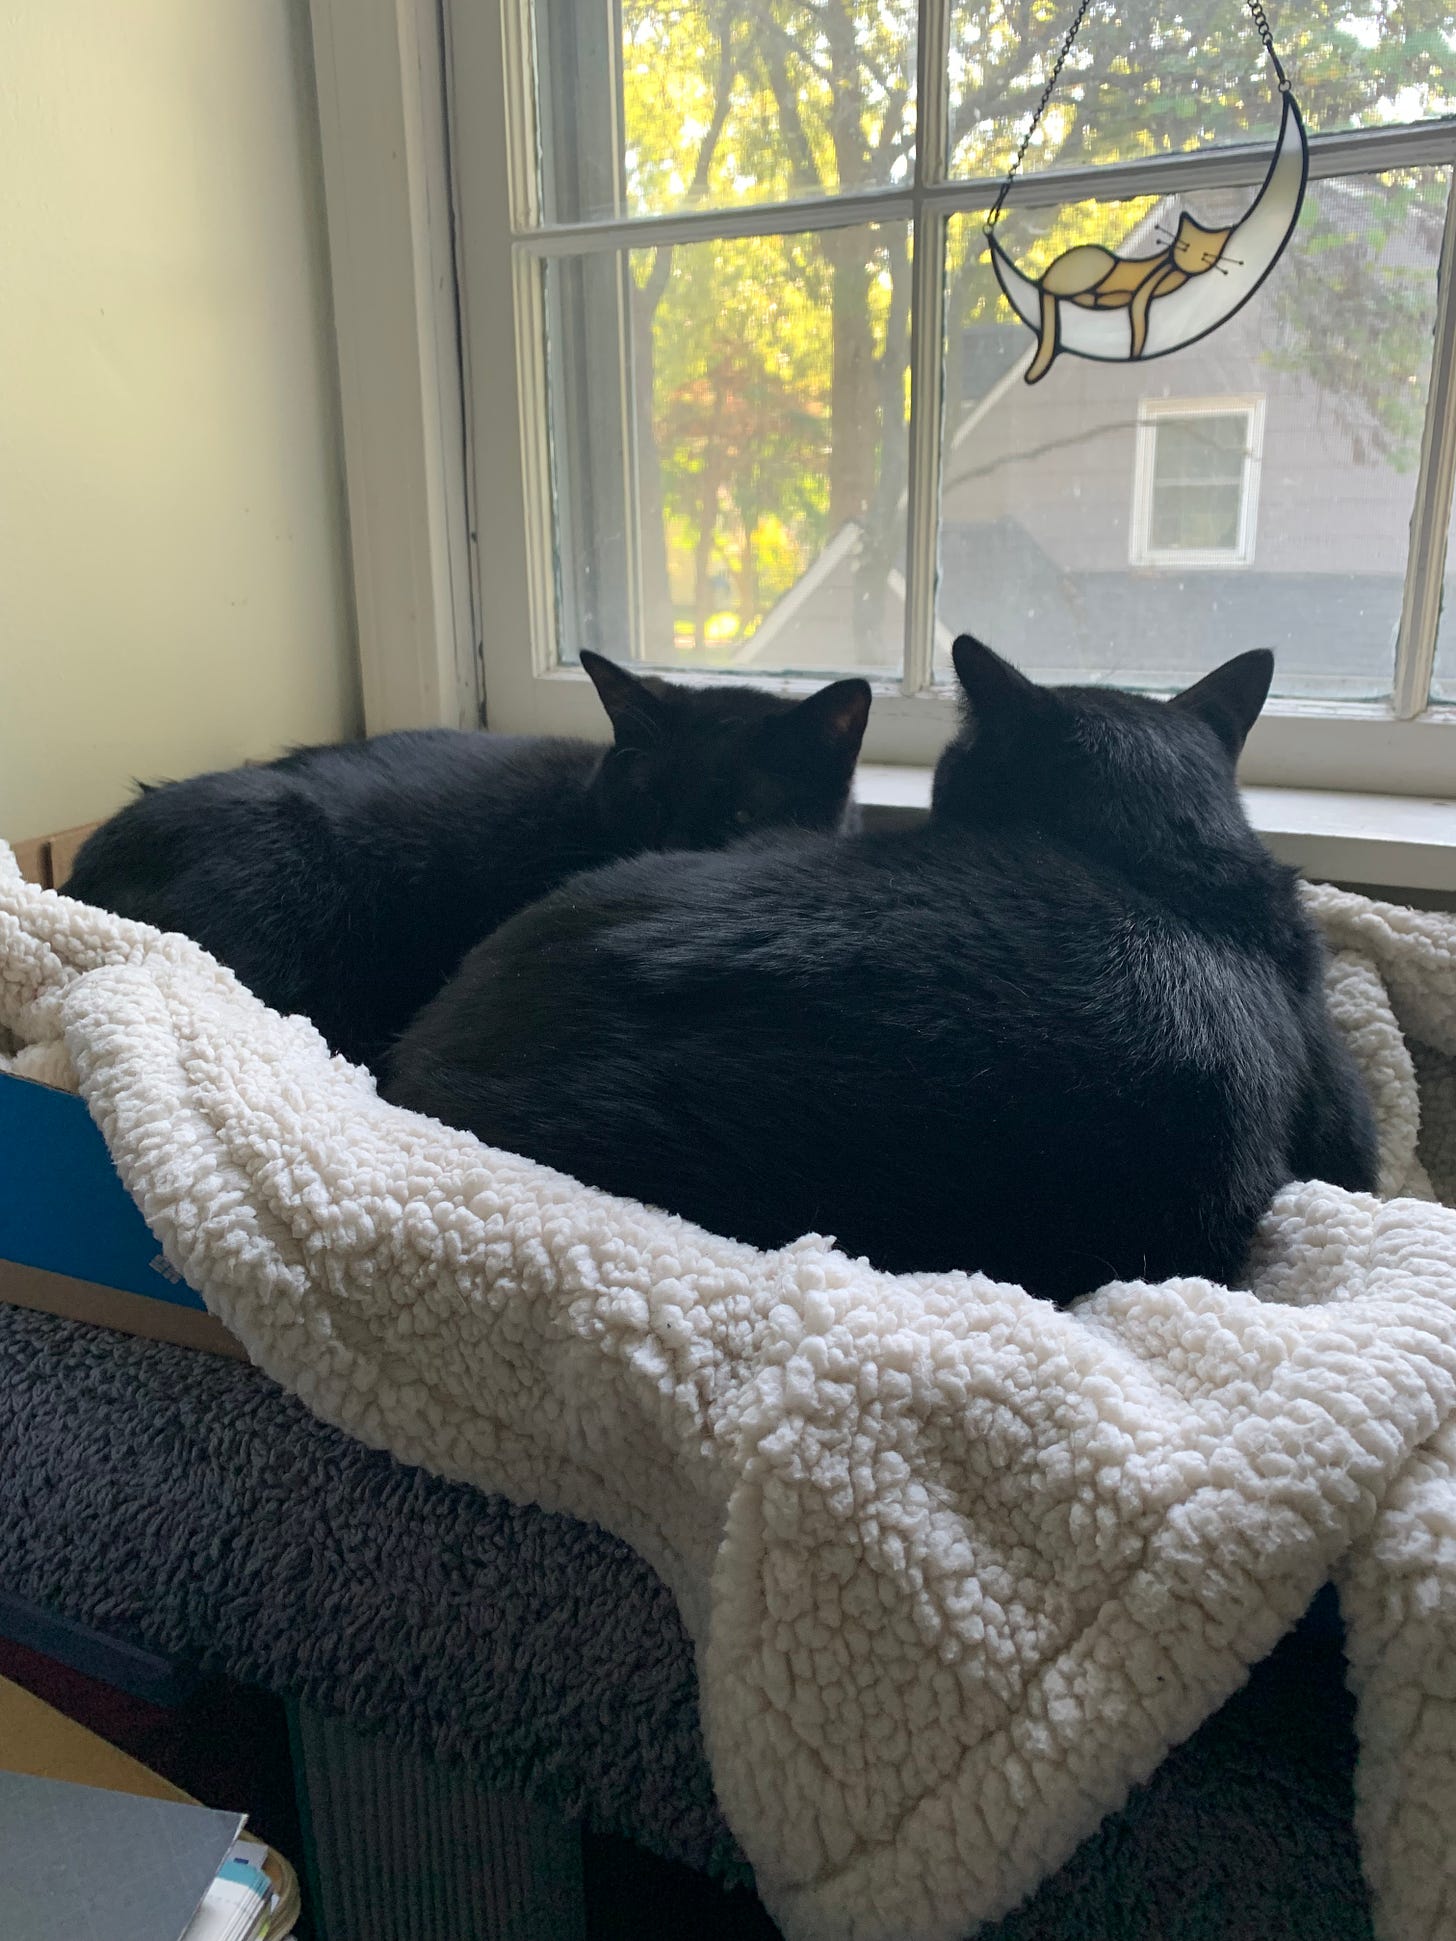 two black cats on a soft blanket by a window. Window ornament of cat sleeping on crescent moon. Trees, housetop outside of window.